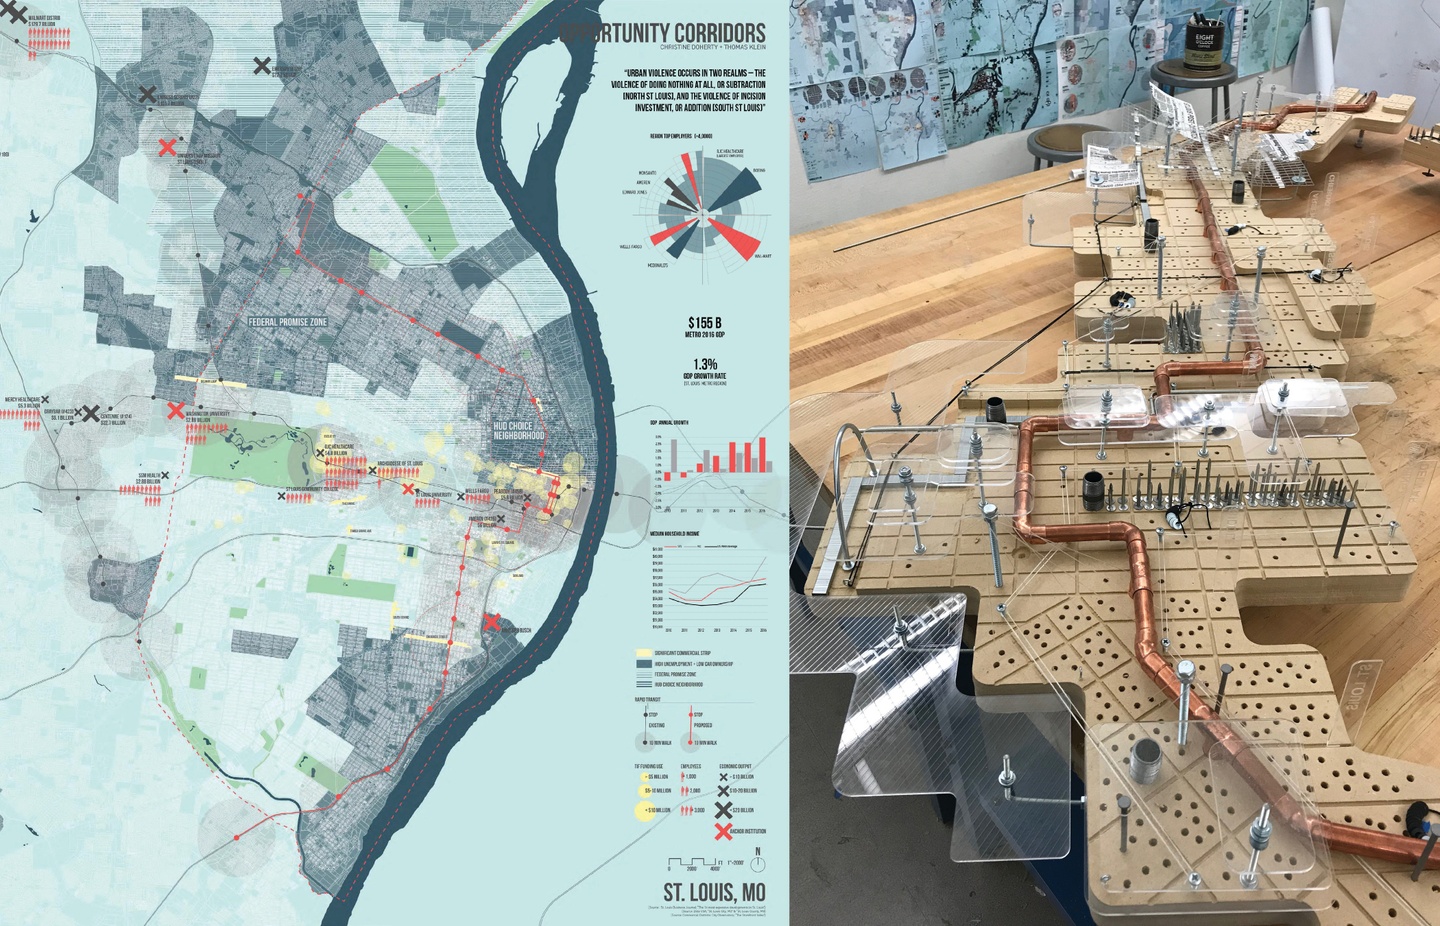 Two images: a map (left) and model (right) showing various ways urban violence transgresses in St. Louis